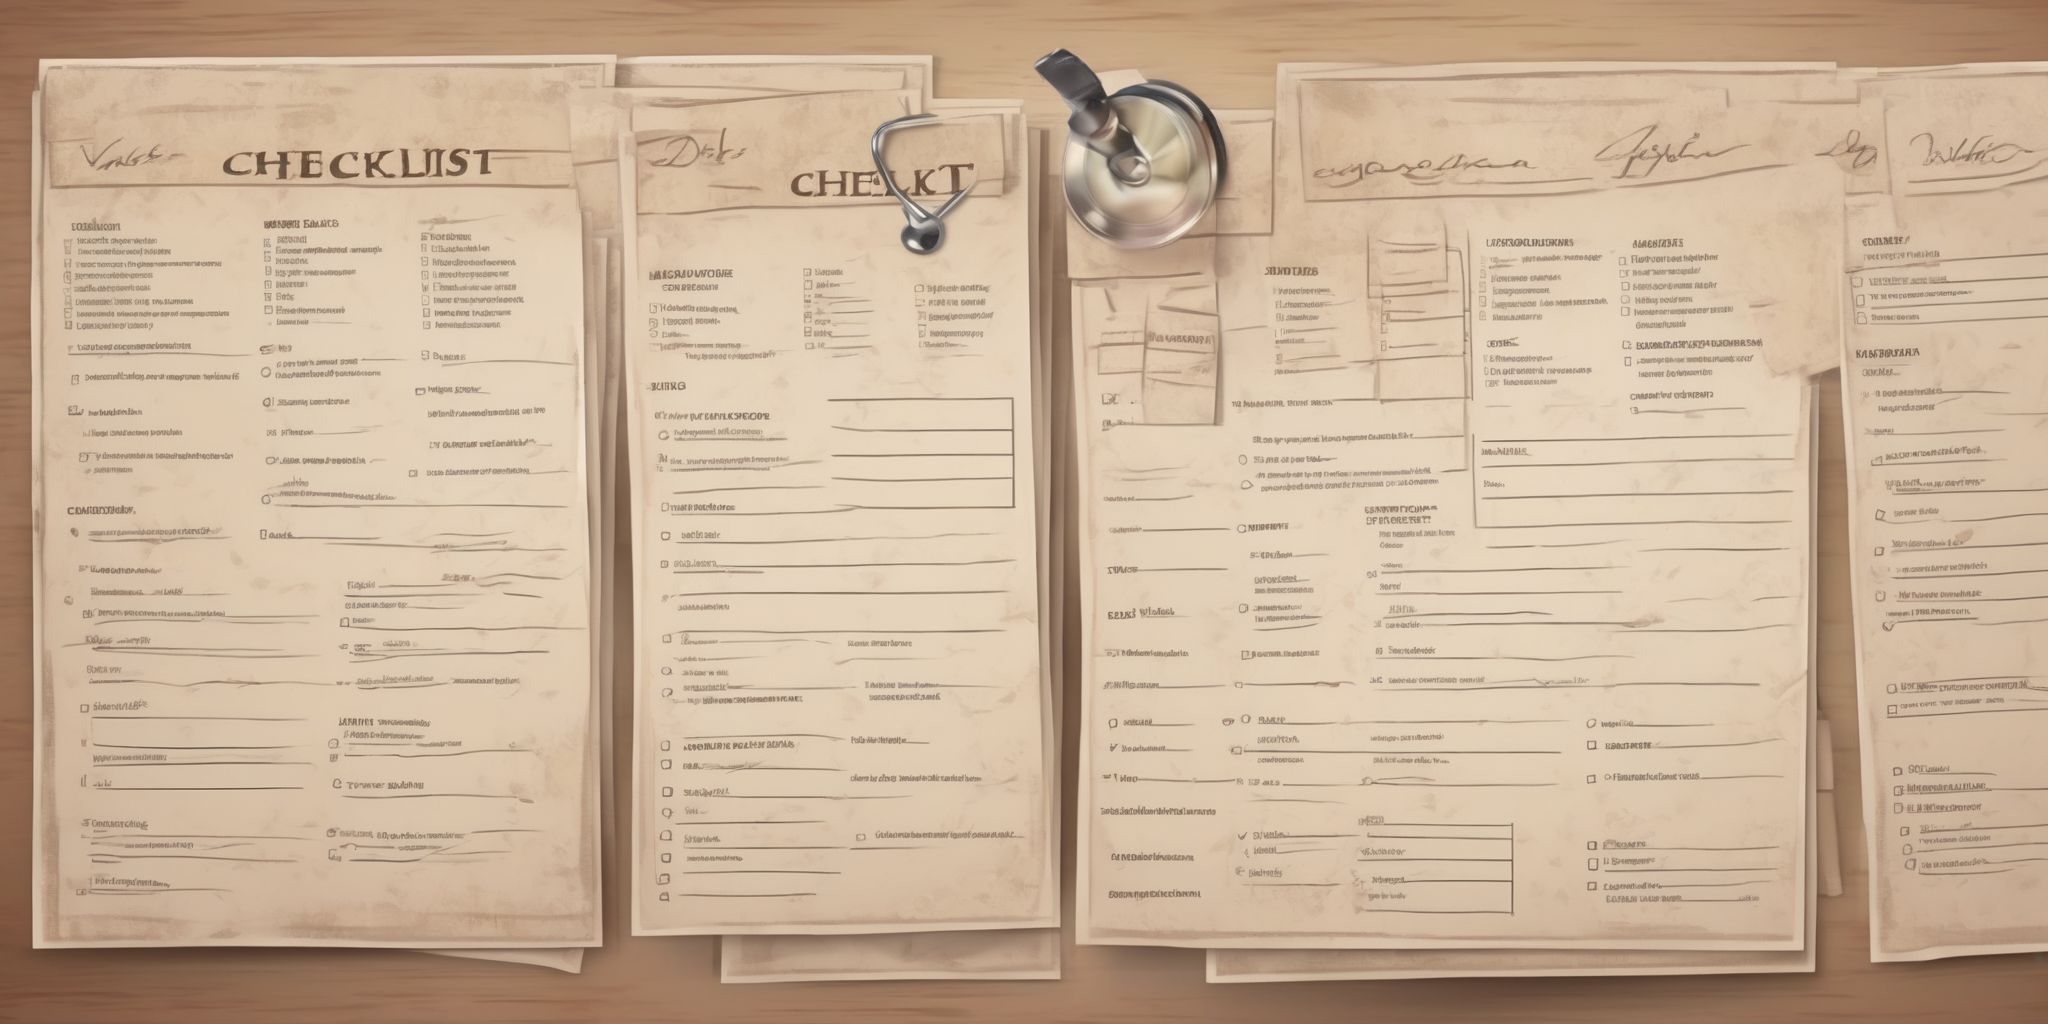 Checklist  in realistic, photographic style